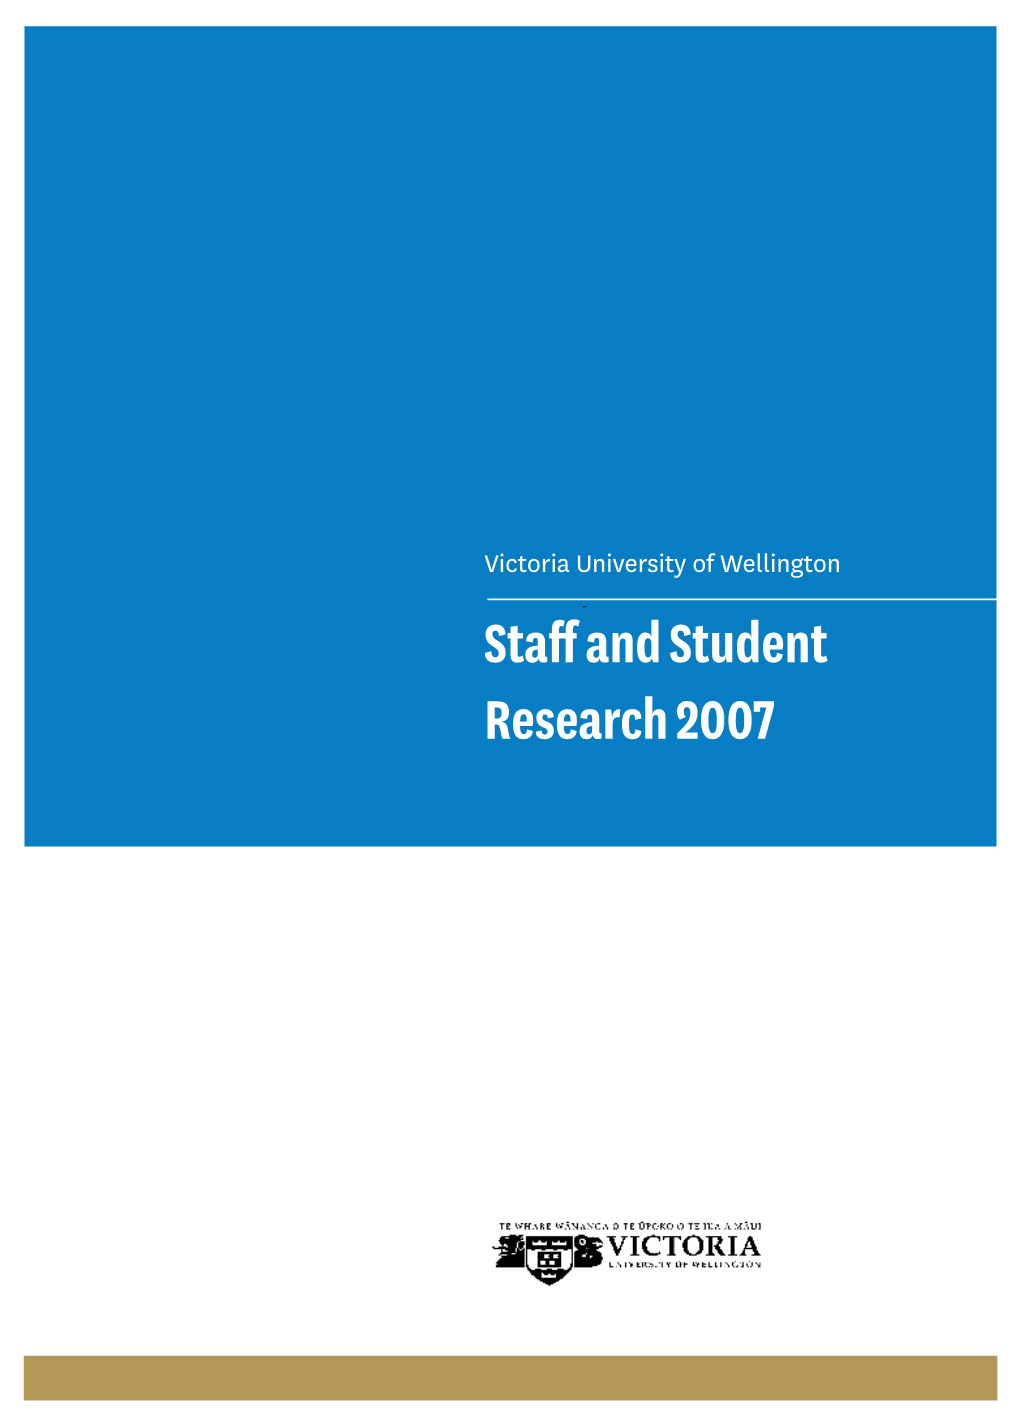 Victoria University of Wellington Staff and Student Research 2007 Table of Contents